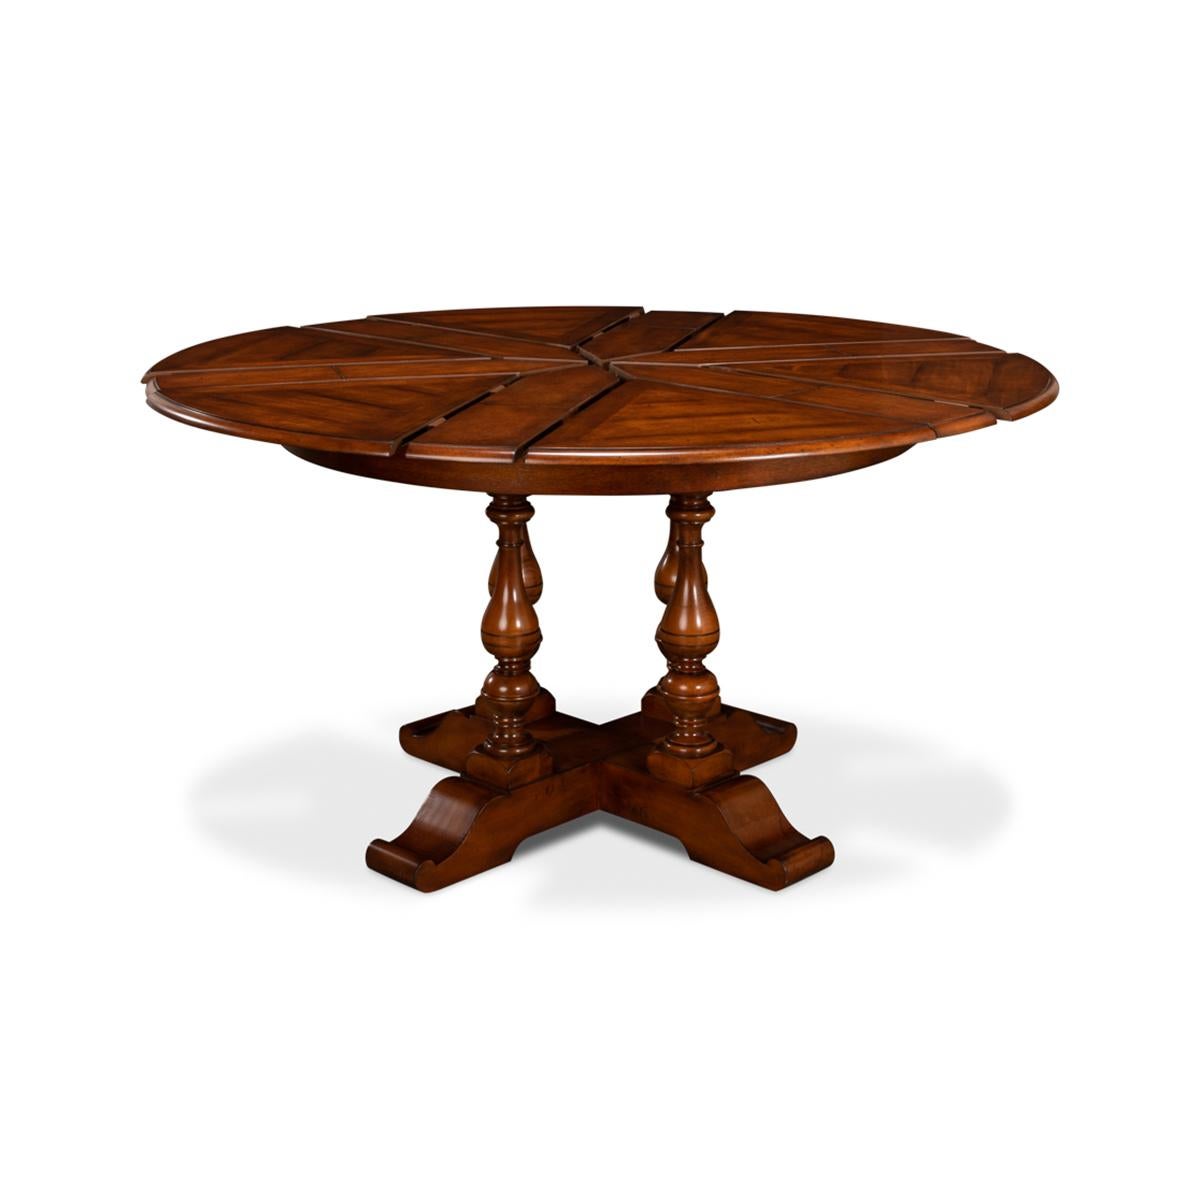 Vietnamese Early English Style Round Extension Dining Table For Sale